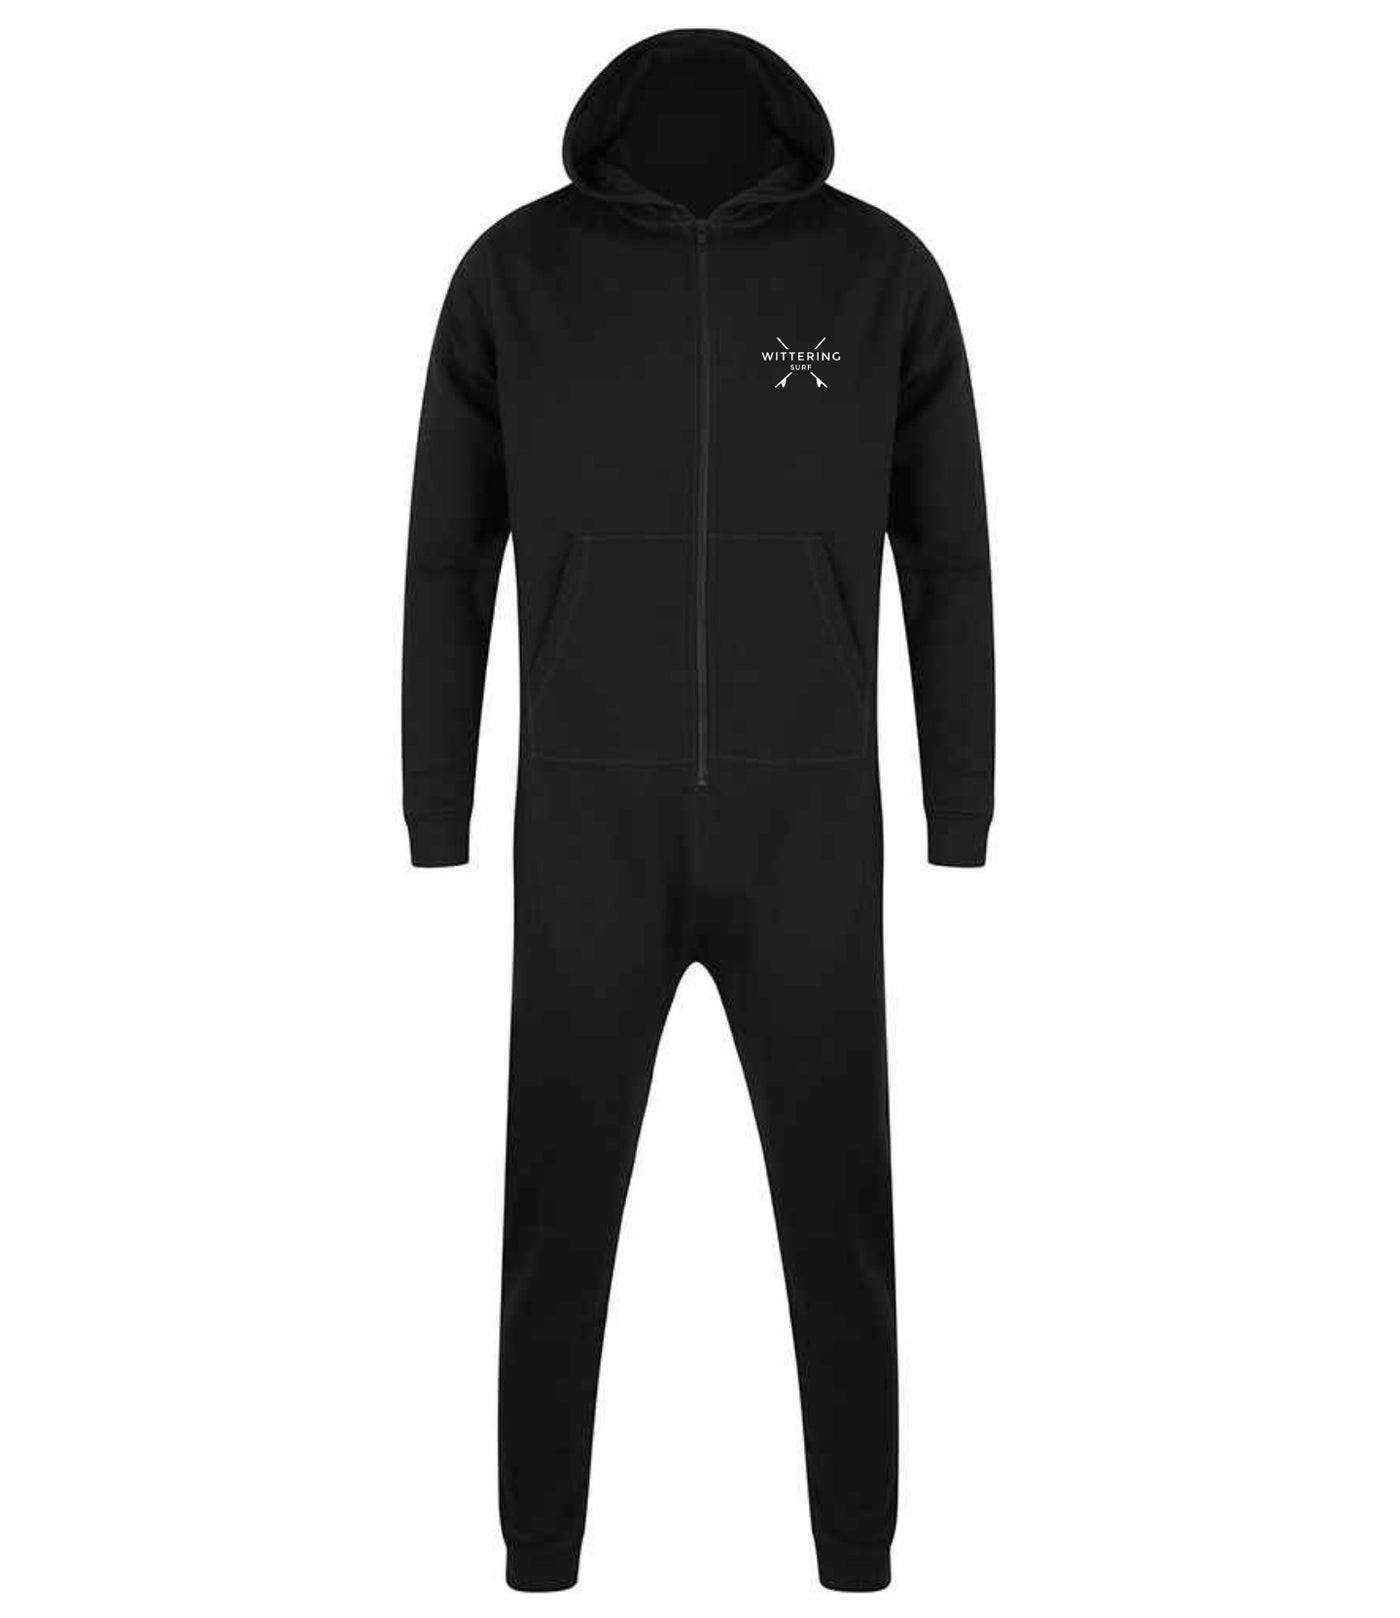 ADULT HOODED LAZY DAYS ONESIE - 2 COLOURS